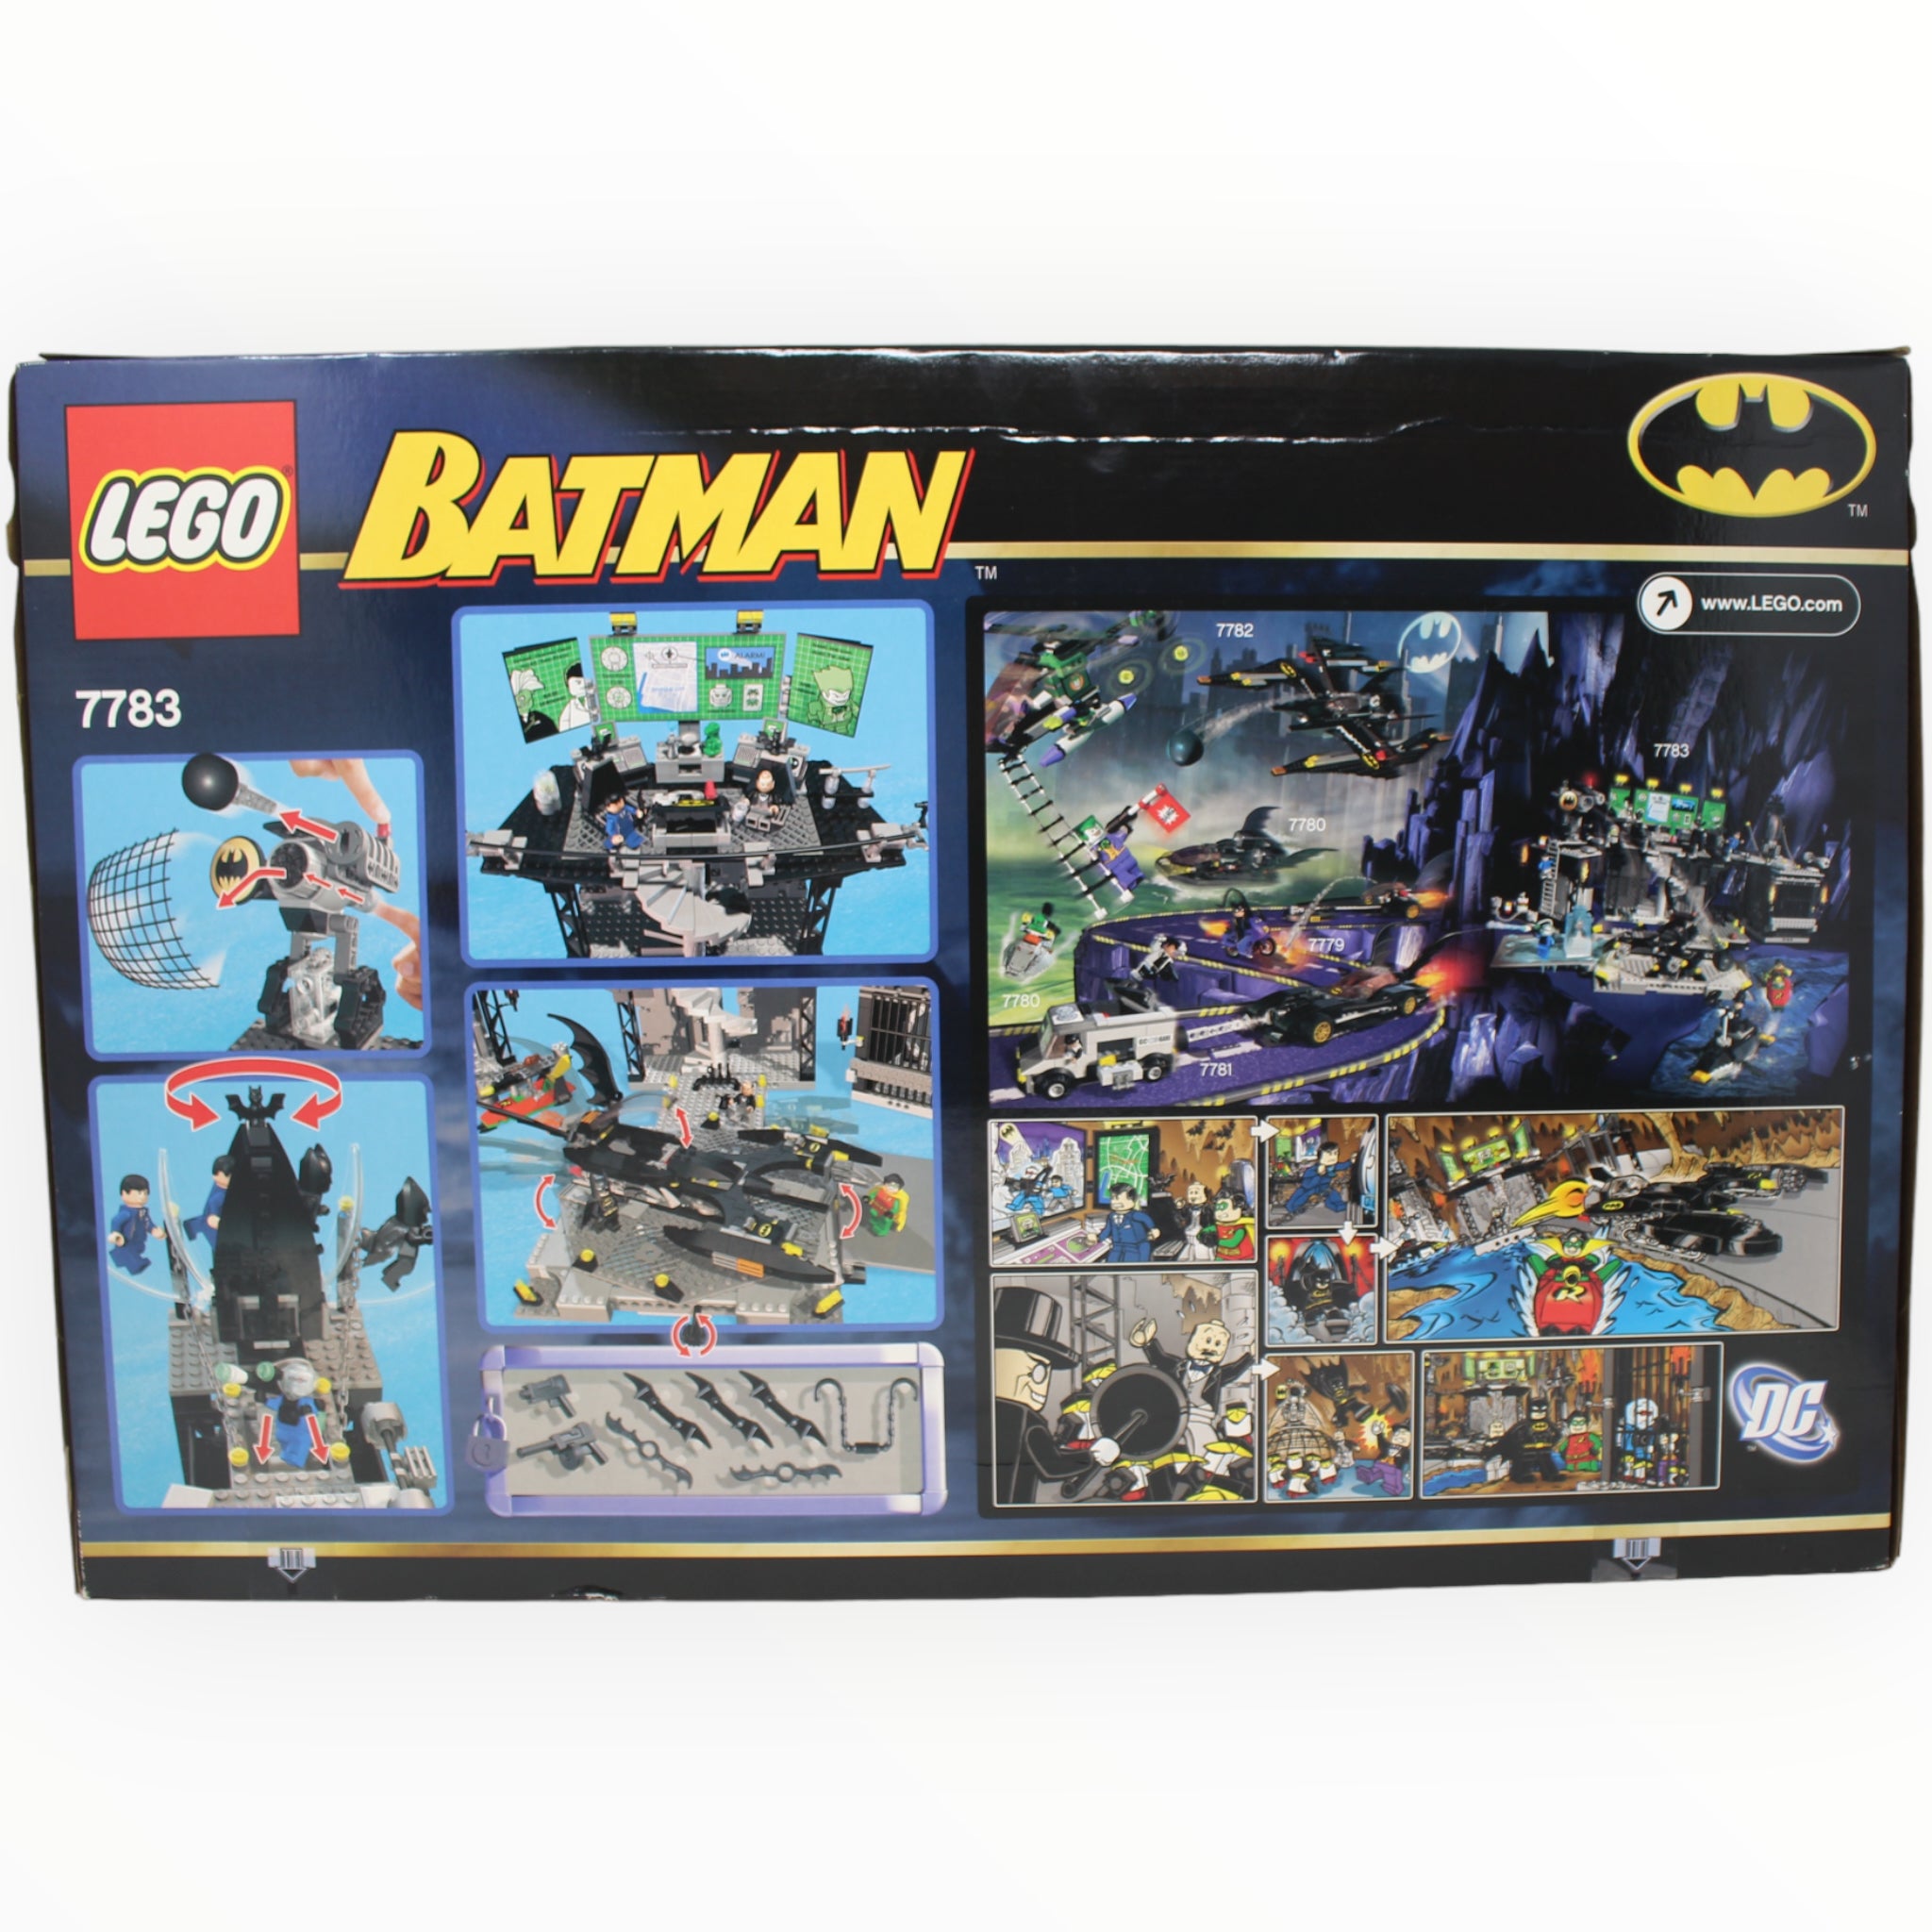 Retired Set 7783 Batman The Batcave: The Penguin and Mr. Freeze’s Invasion